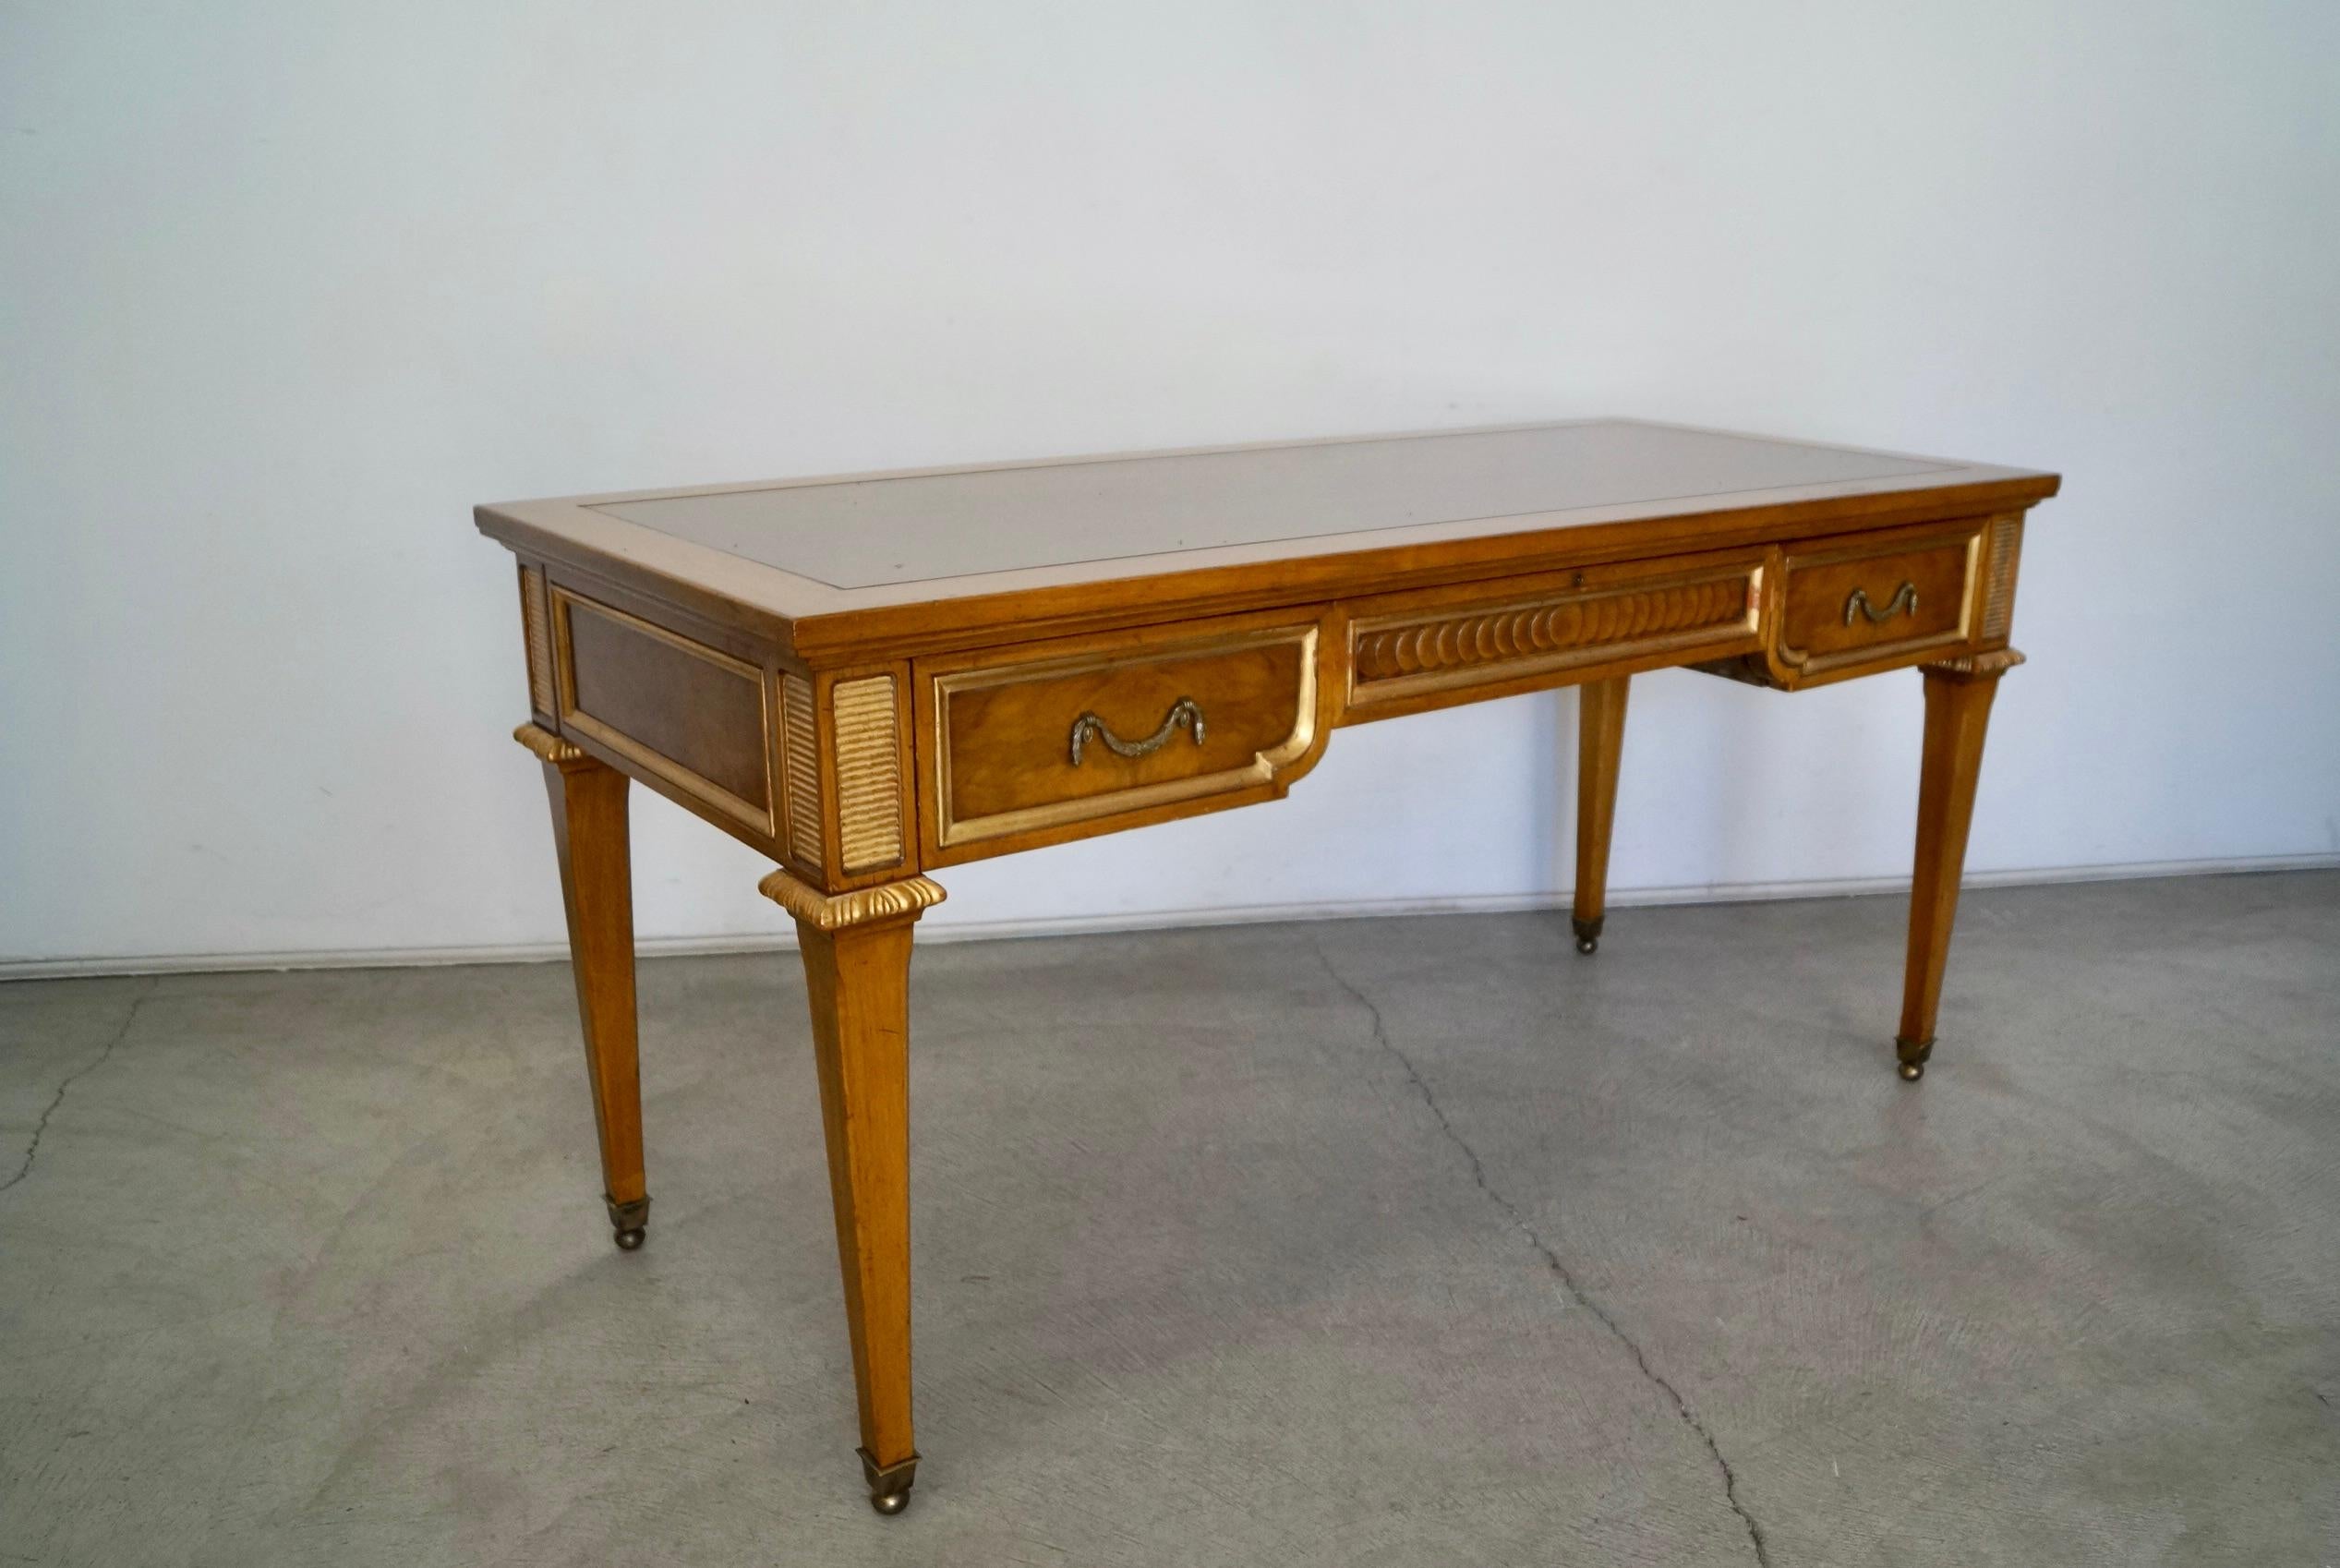 1960s Hollywood Regency Neoclassical Revival Karges Writing Desk In Good Condition For Sale In Burbank, CA